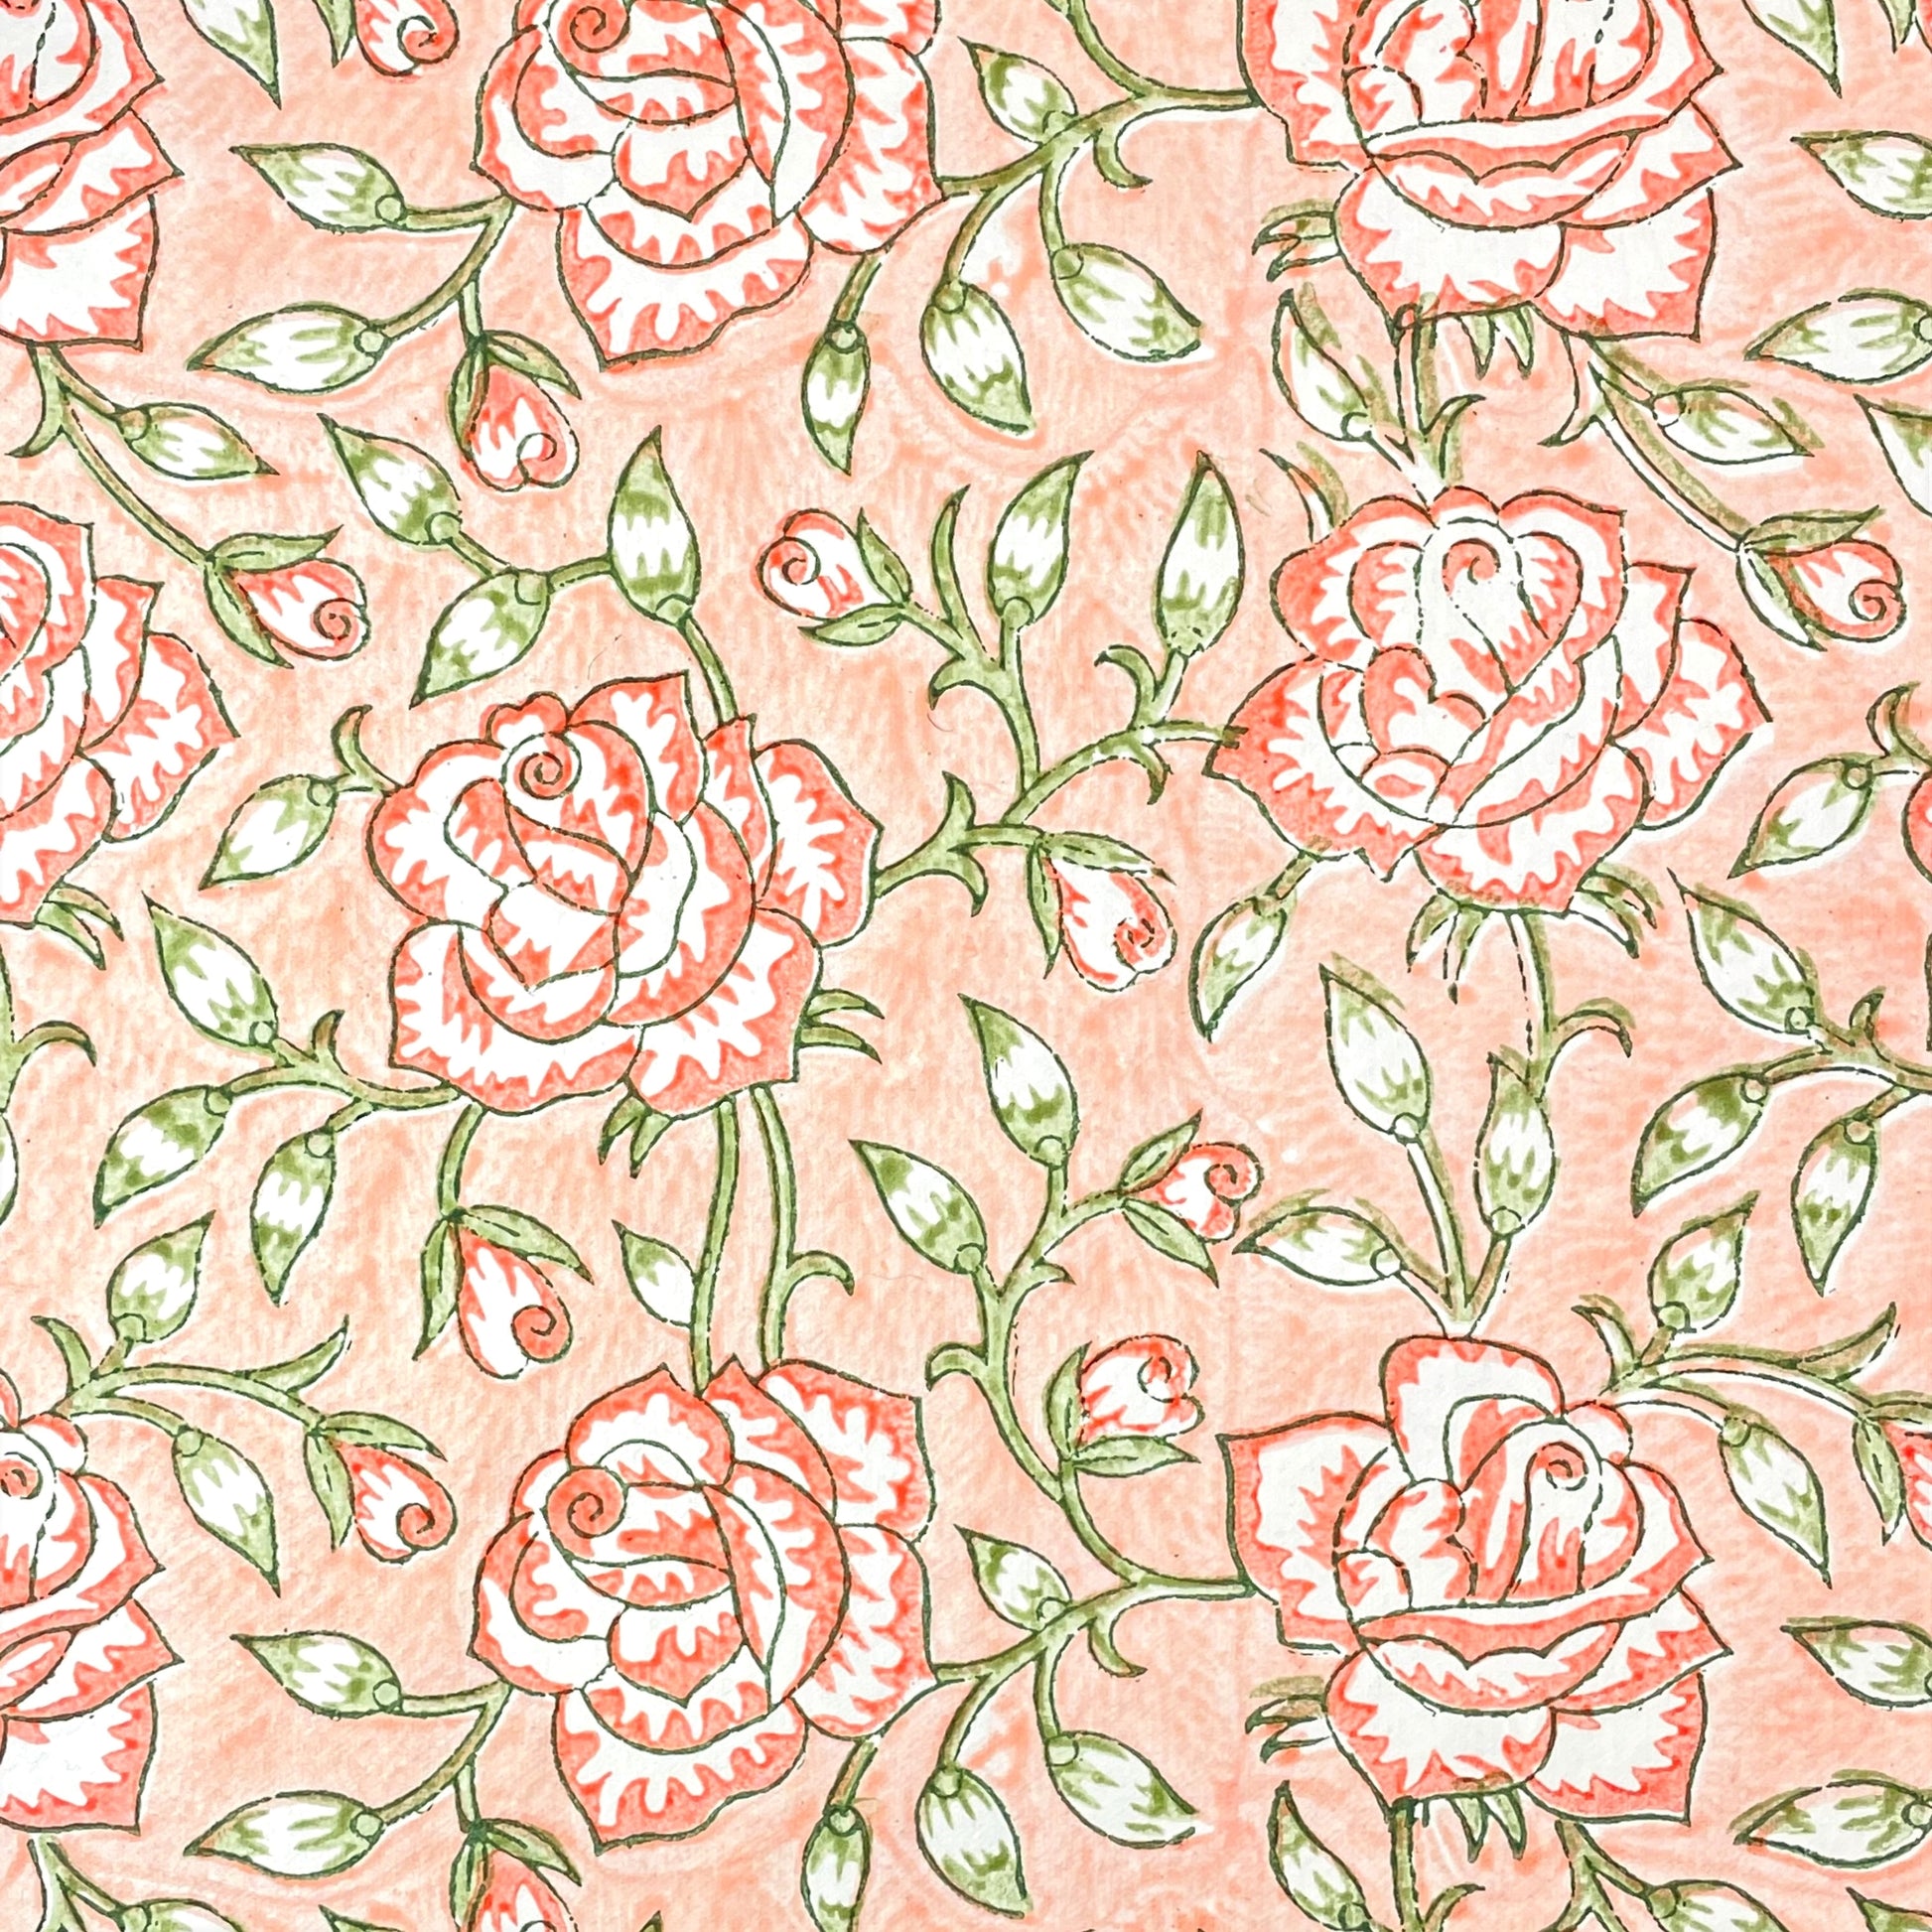 wrapping paper with repeat botanical rose pattern in coral and green by Paper Mirchi